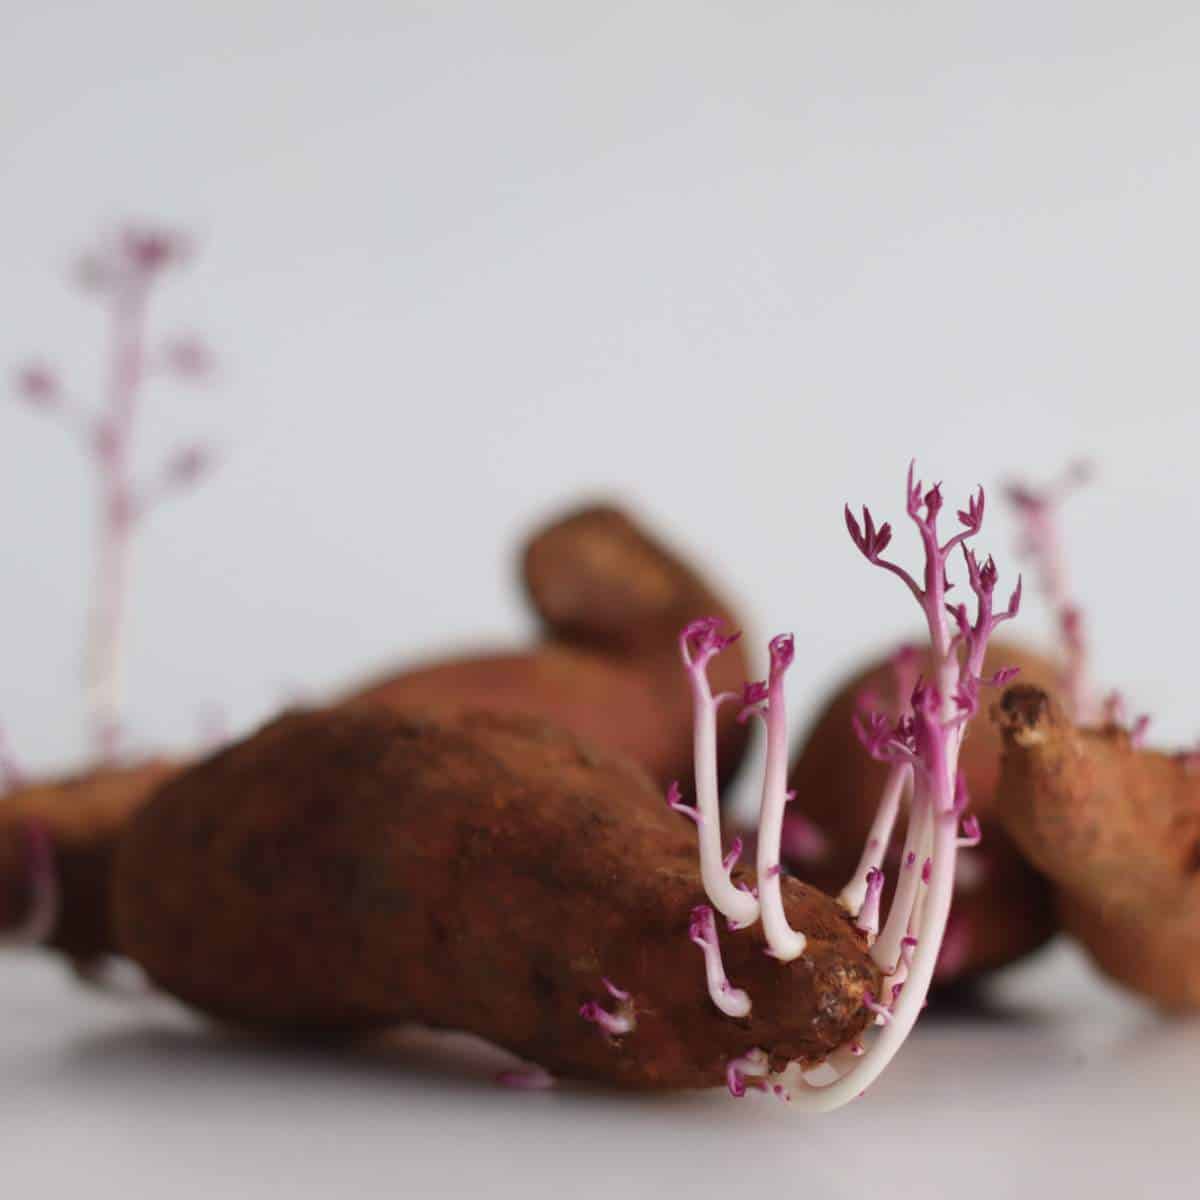 Sweet potatoes with purple sprouts on a white surface.